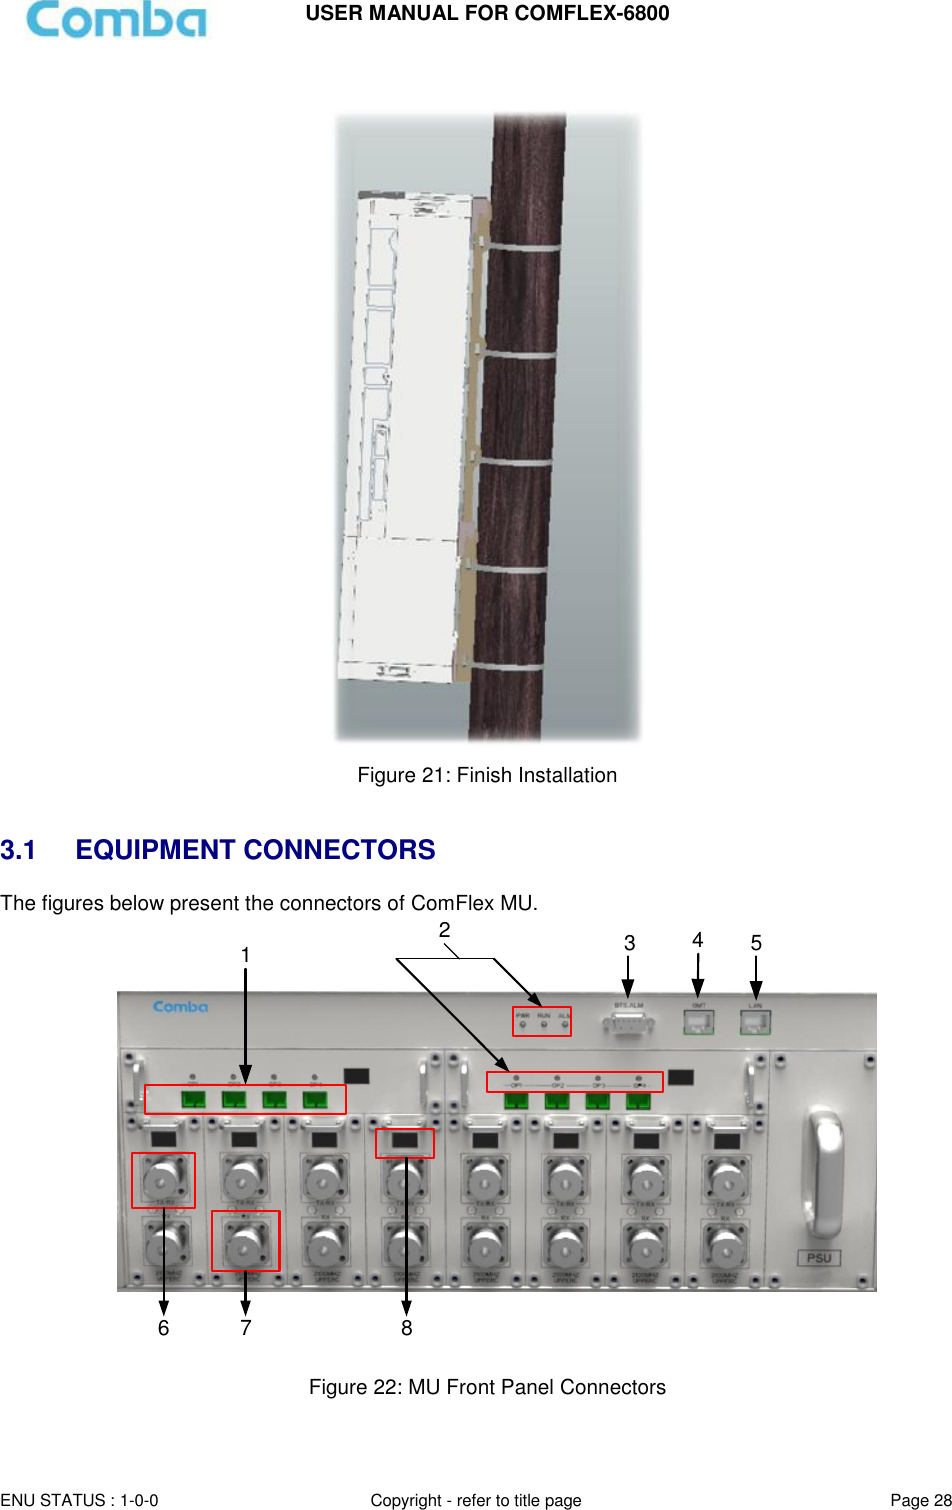 USER MANUAL FOR COMFLEX-6800  ENU STATUS : 1-0-0 Copyright - refer to title page Page 28    Figure 21: Finish Installation   3.1  EQUIPMENT CONNECTORS The figures below present the connectors of ComFlex MU. 123456 7 8  Figure 22: MU Front Panel Connectors  